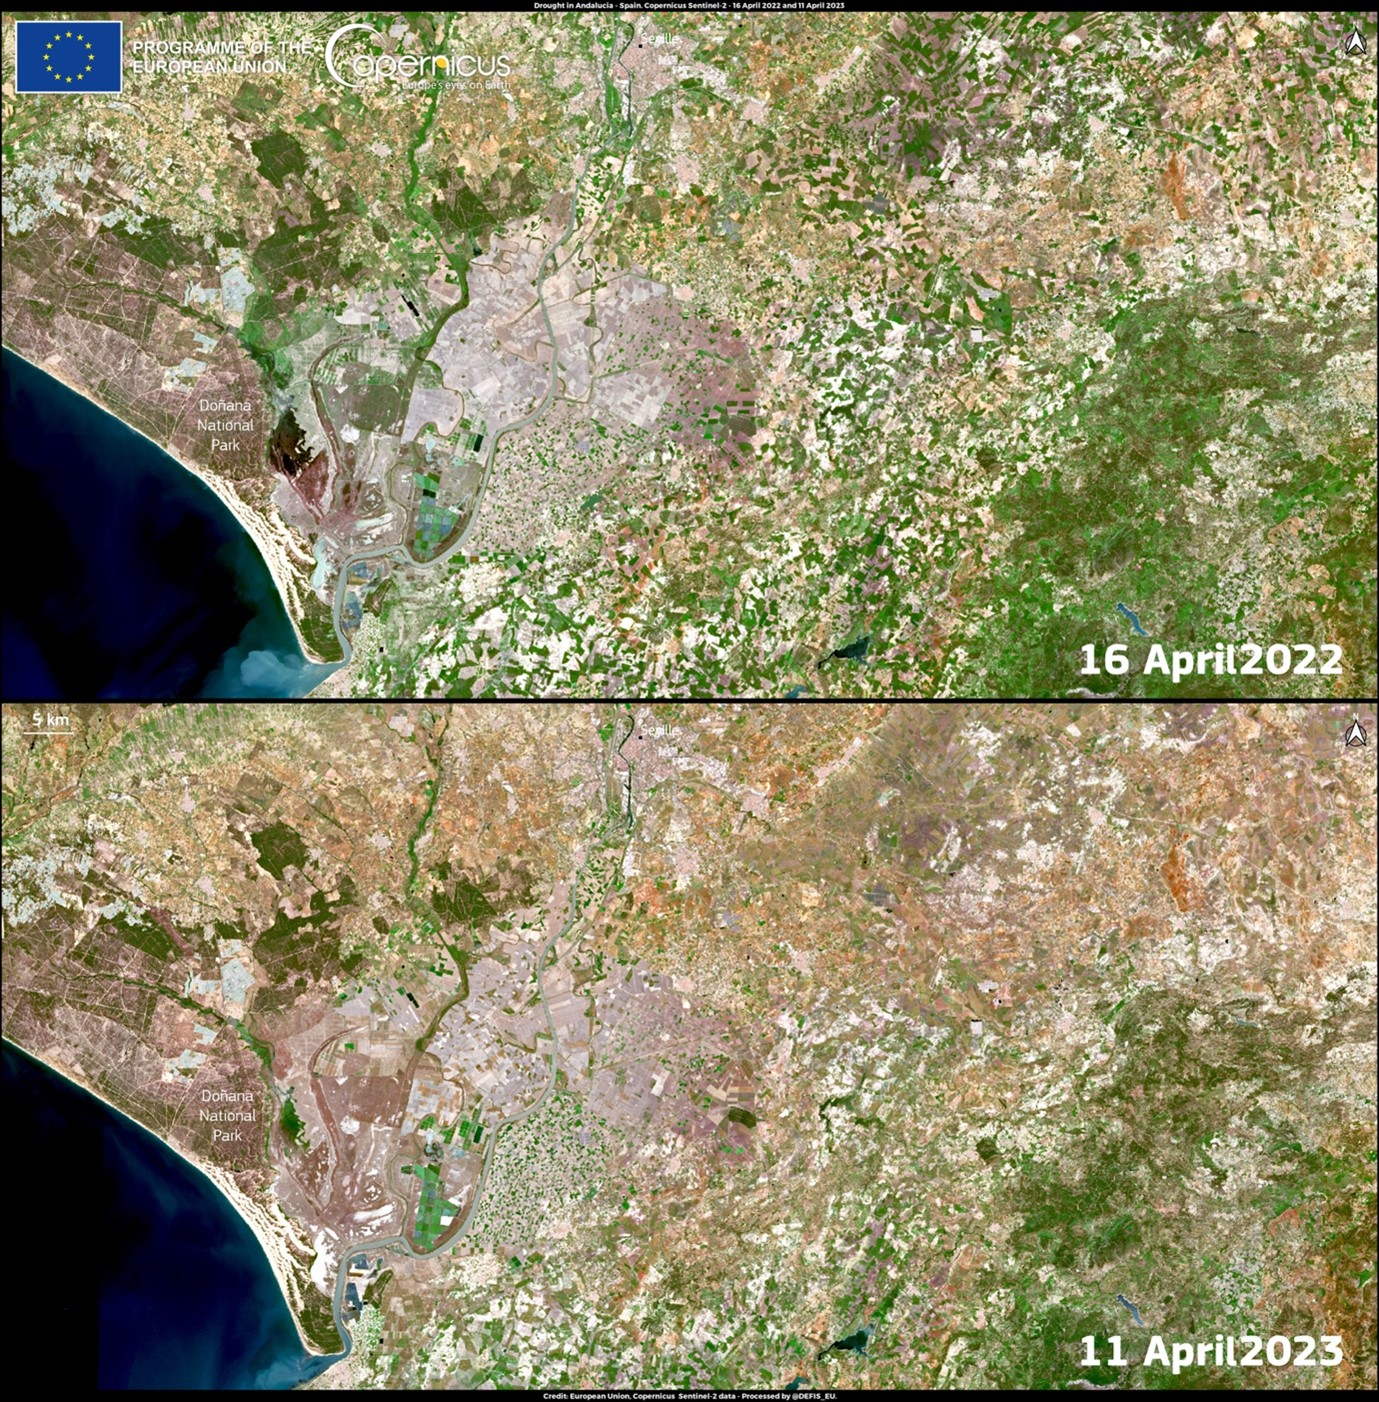 European Union, Copernicus Sentinel-2 imagery. These images were taken on 16th April 2022 and 11th April 2023. The image taken in 2023 shows the striking absence of vegetation. The permanent water bodies in the Doñana National Park also appear dry in the April 2023 image, and this poses a threat to the survival of the wildfire that relies on these water sources.